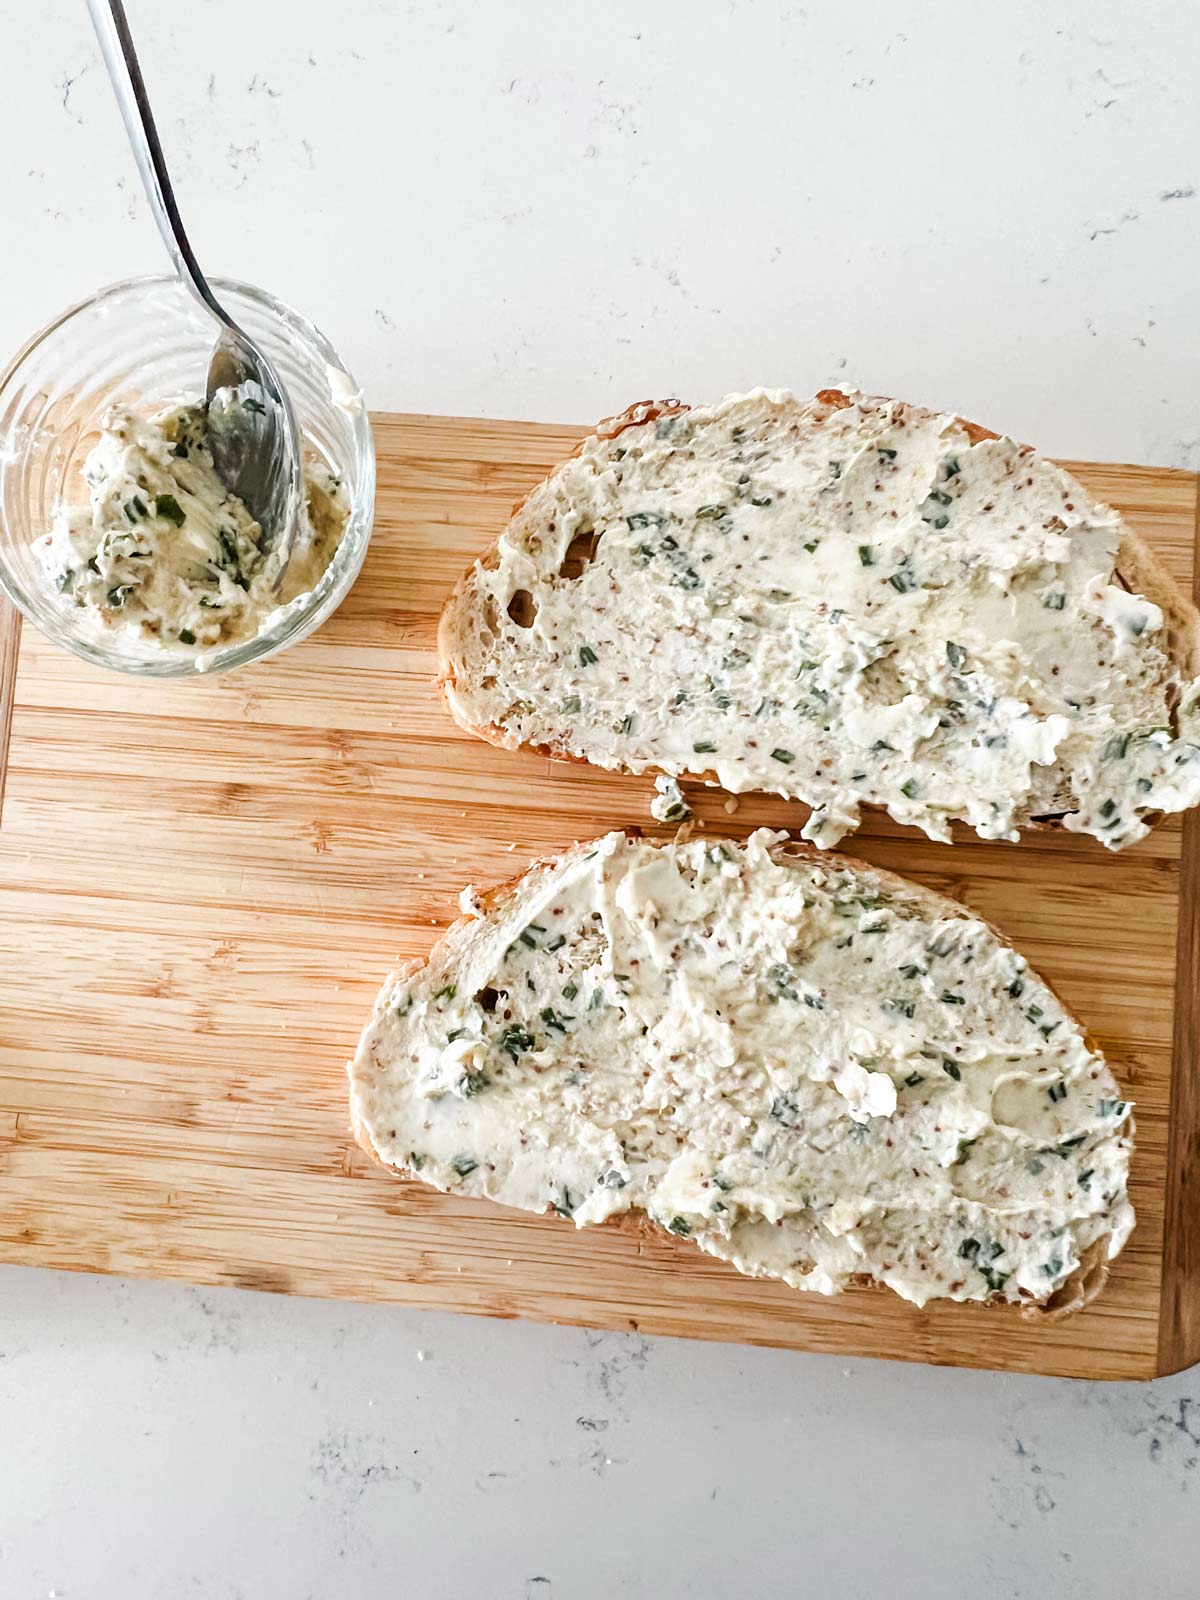 Two pieces of bread with a cream cheese chive spread.